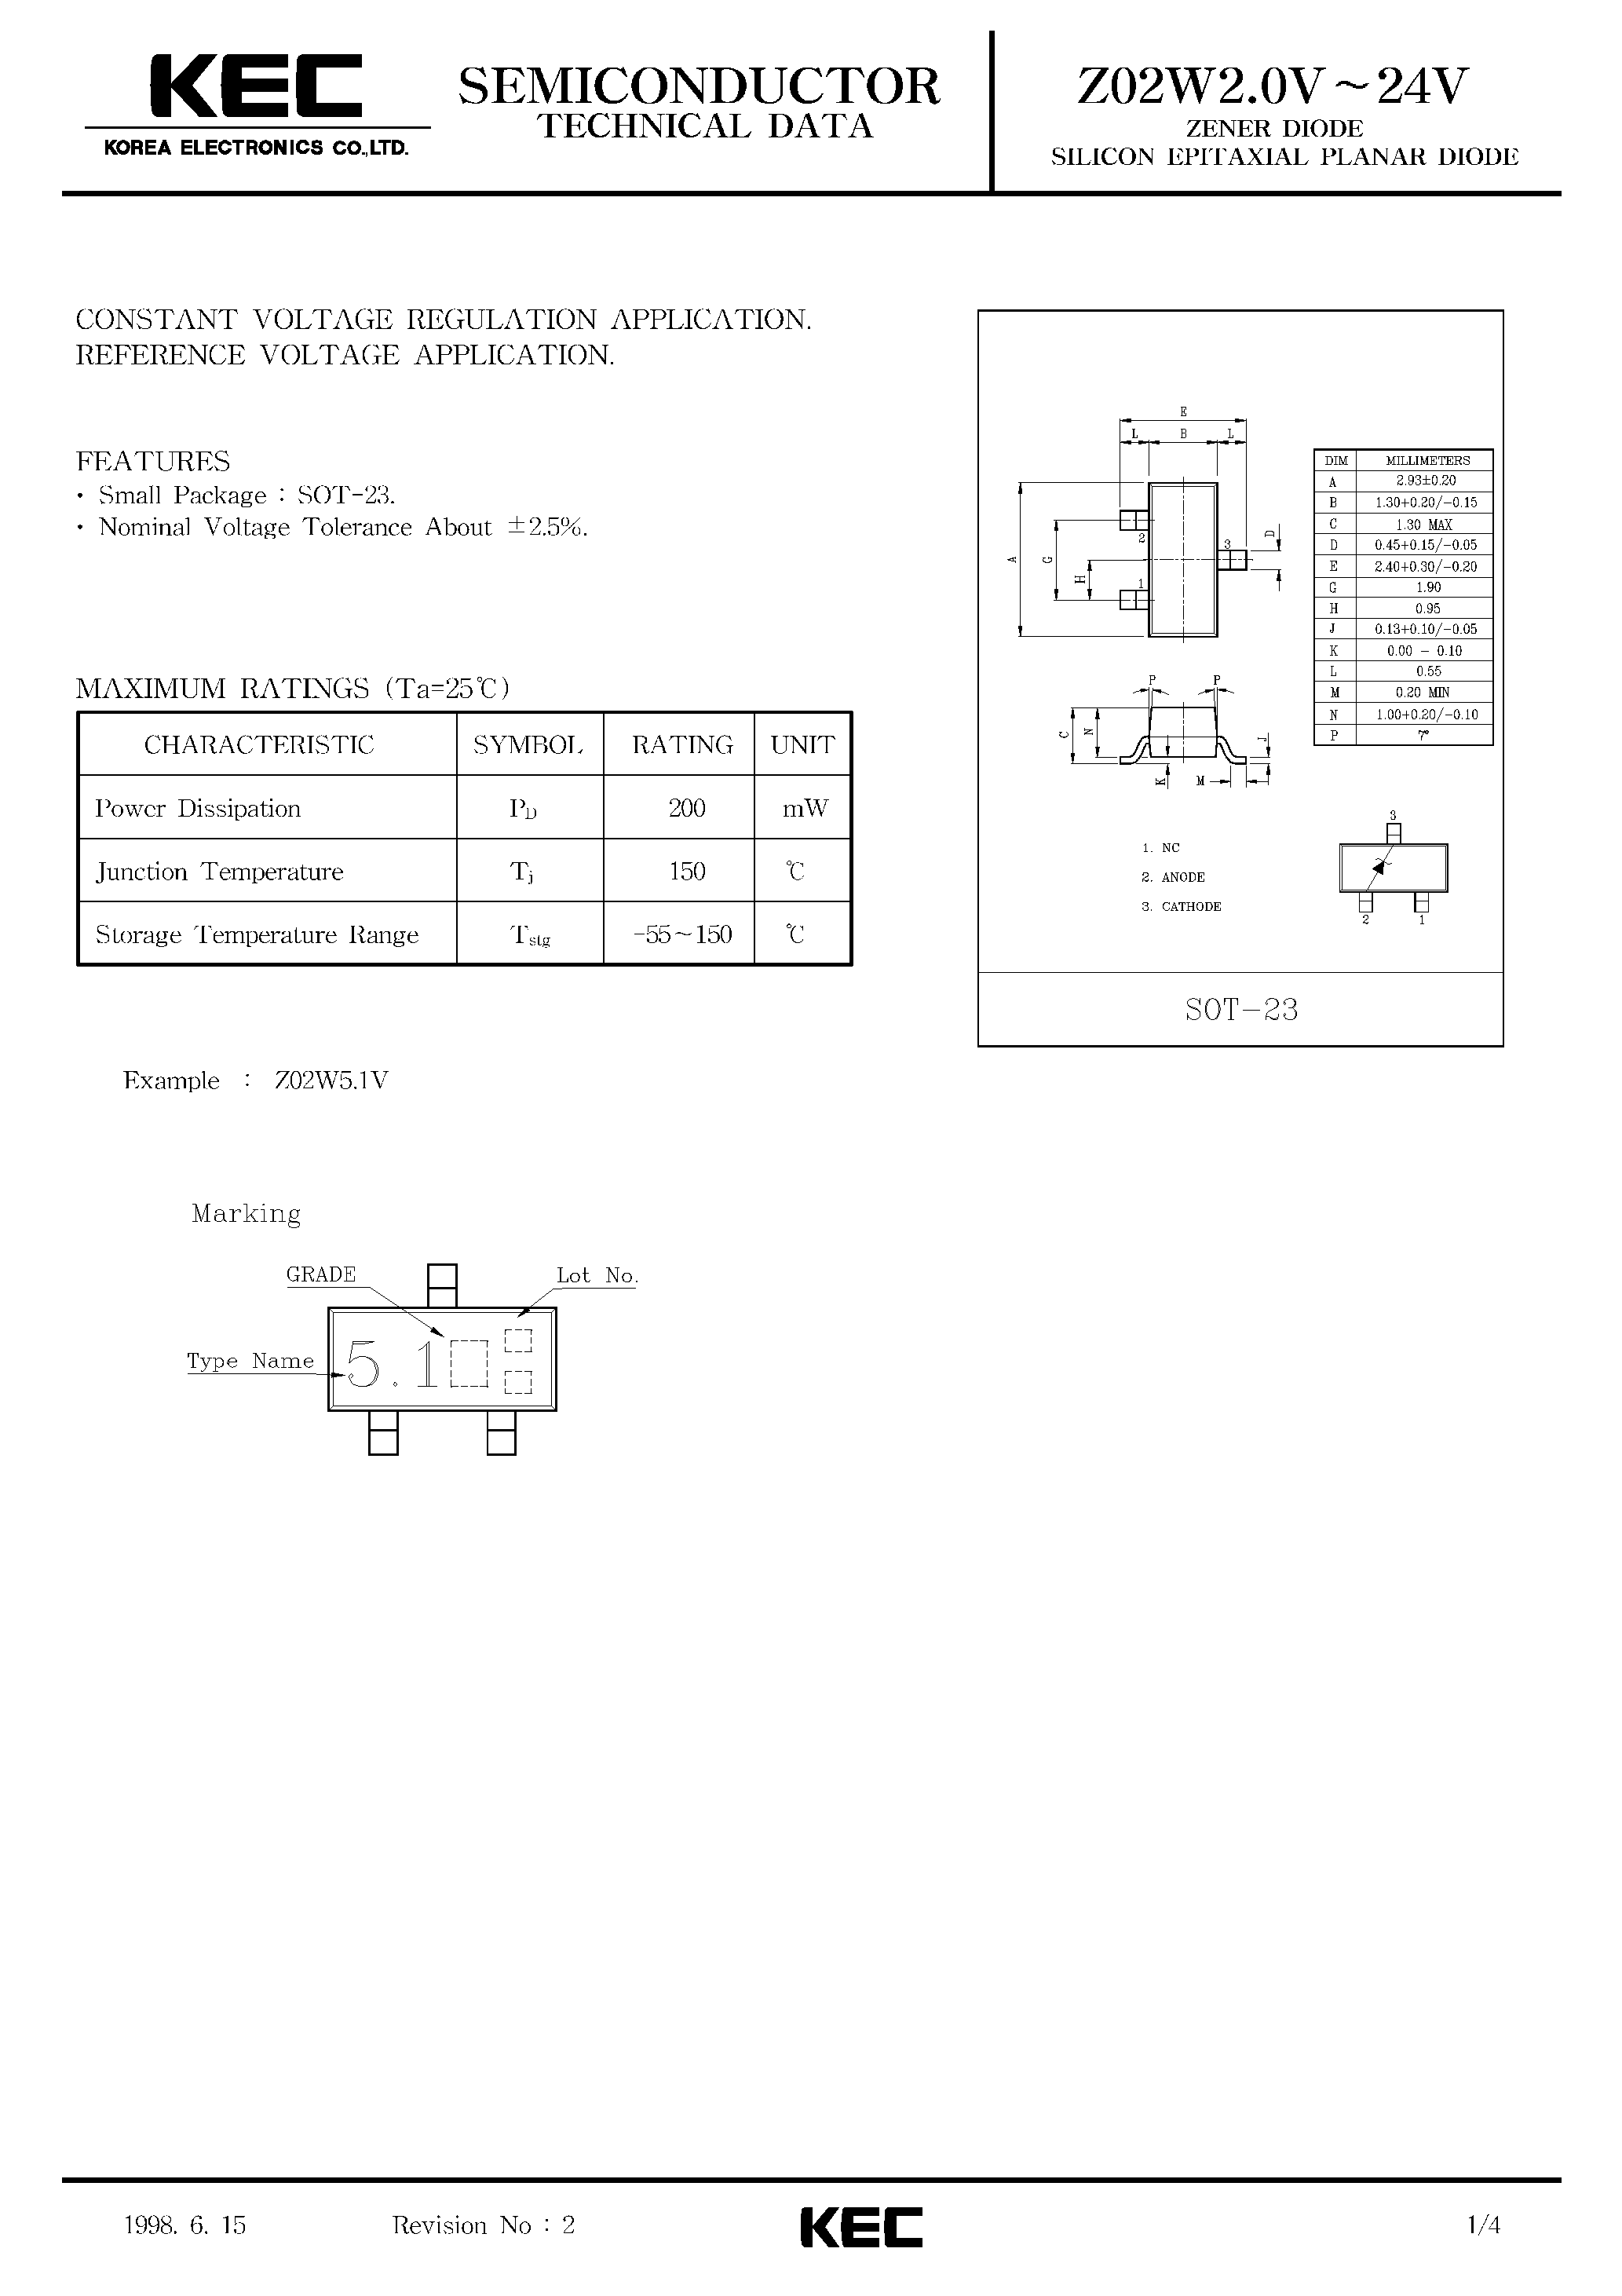 Datasheet Z02W4.3V - ZENER DIODE SILICON EPITAXIAL PLANAR DIODE page 1